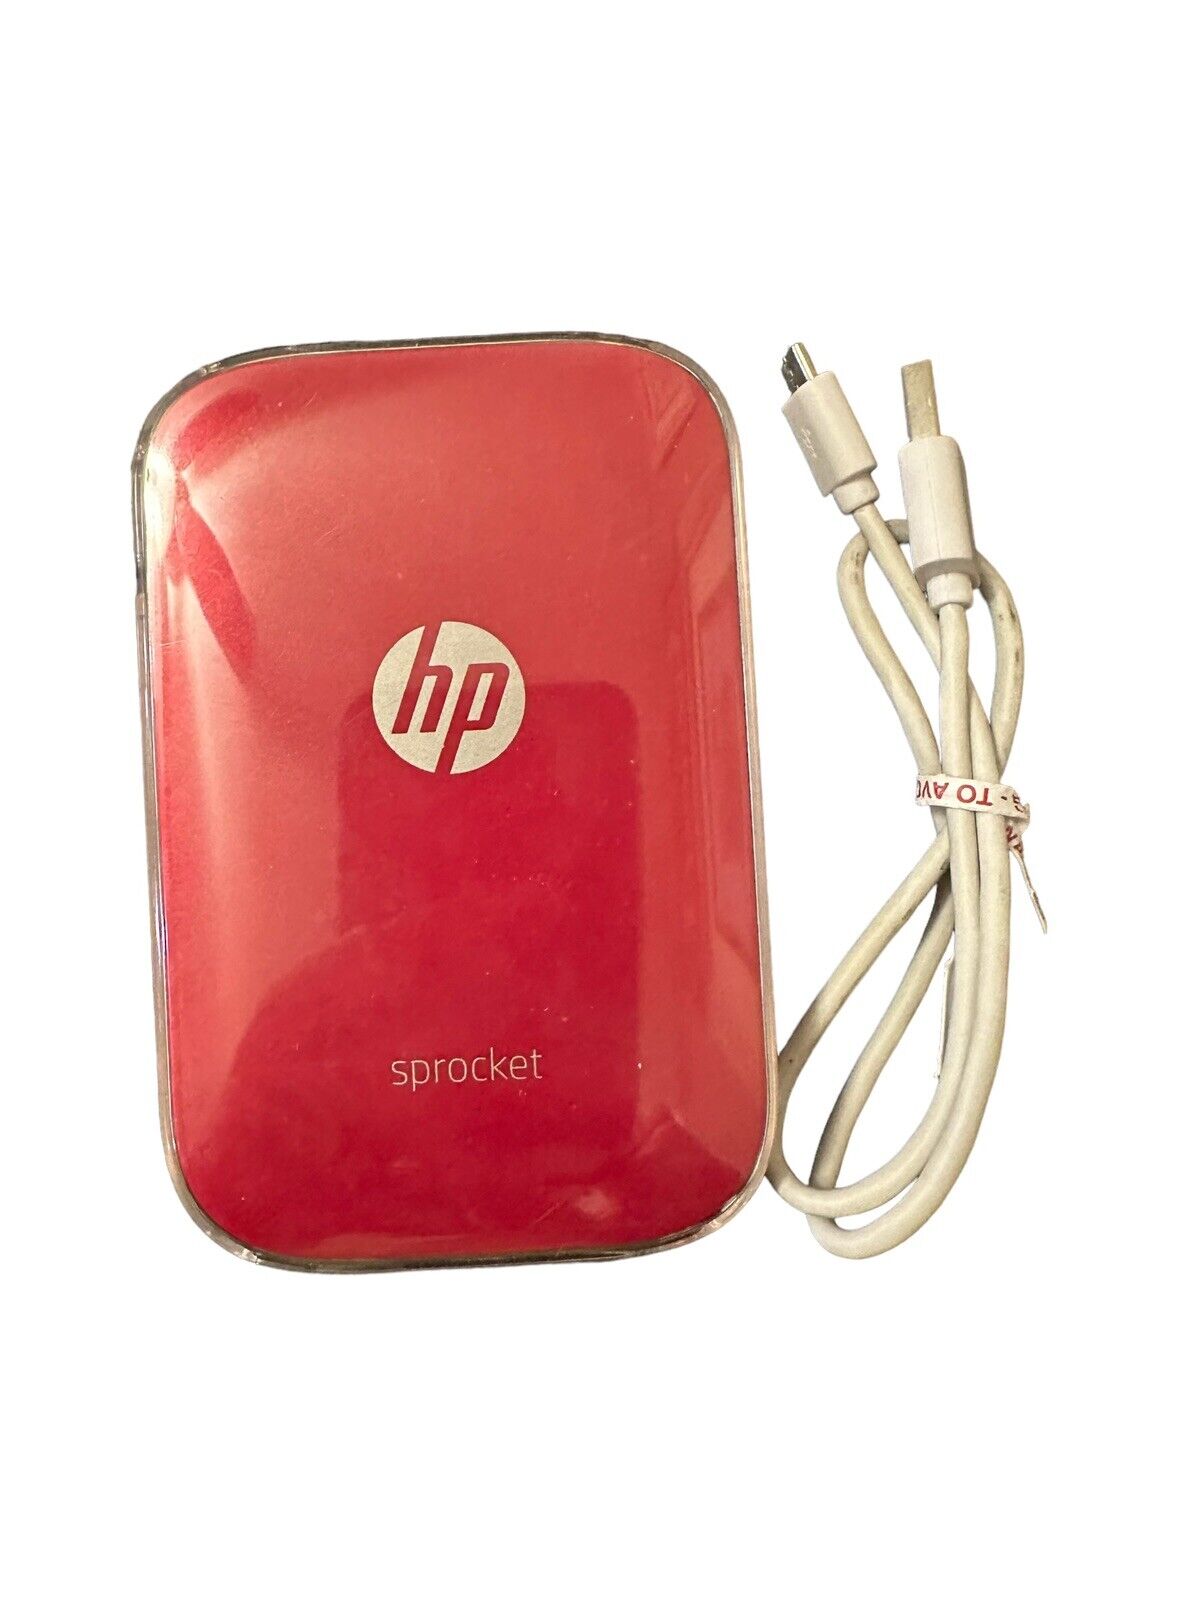 HP Sprocket Bluetooth Photo Printer - Red With Charging Cable Tested